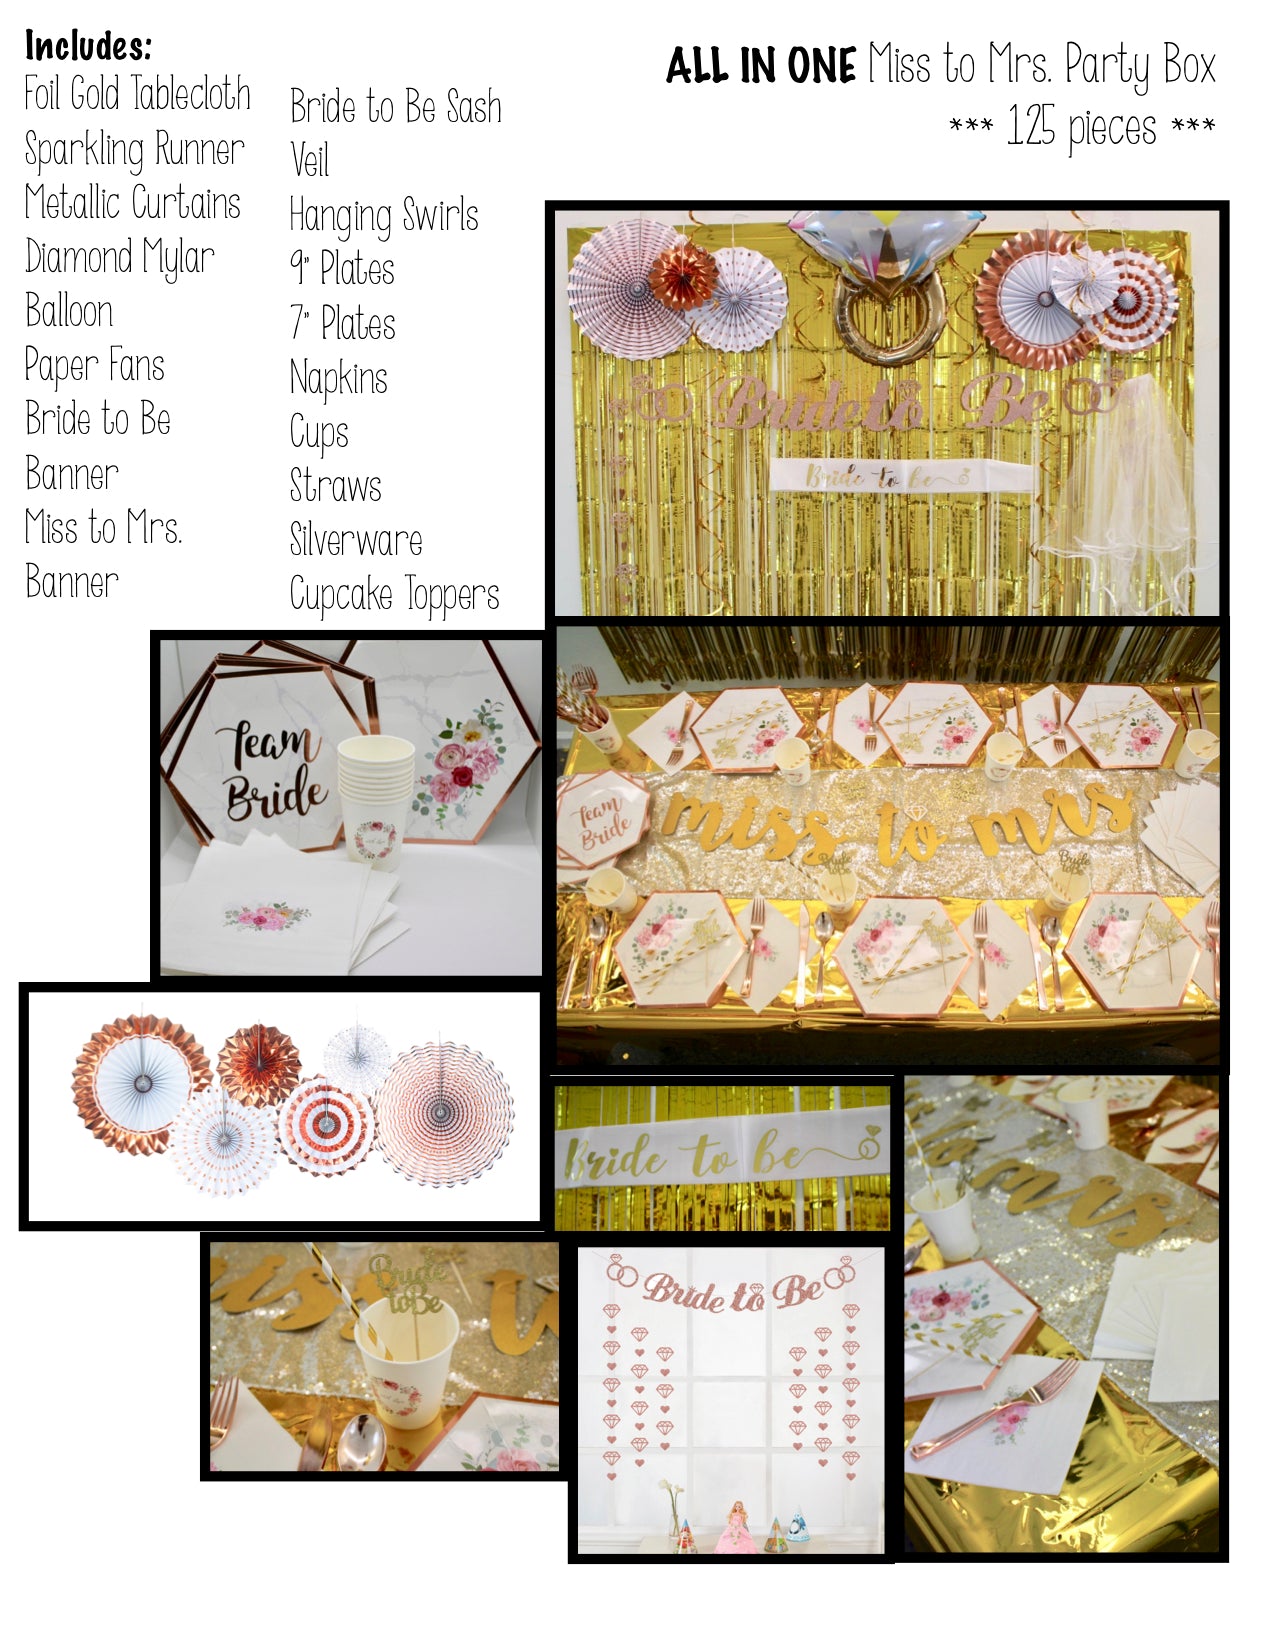 Miss to Mrs Bridal Party Box